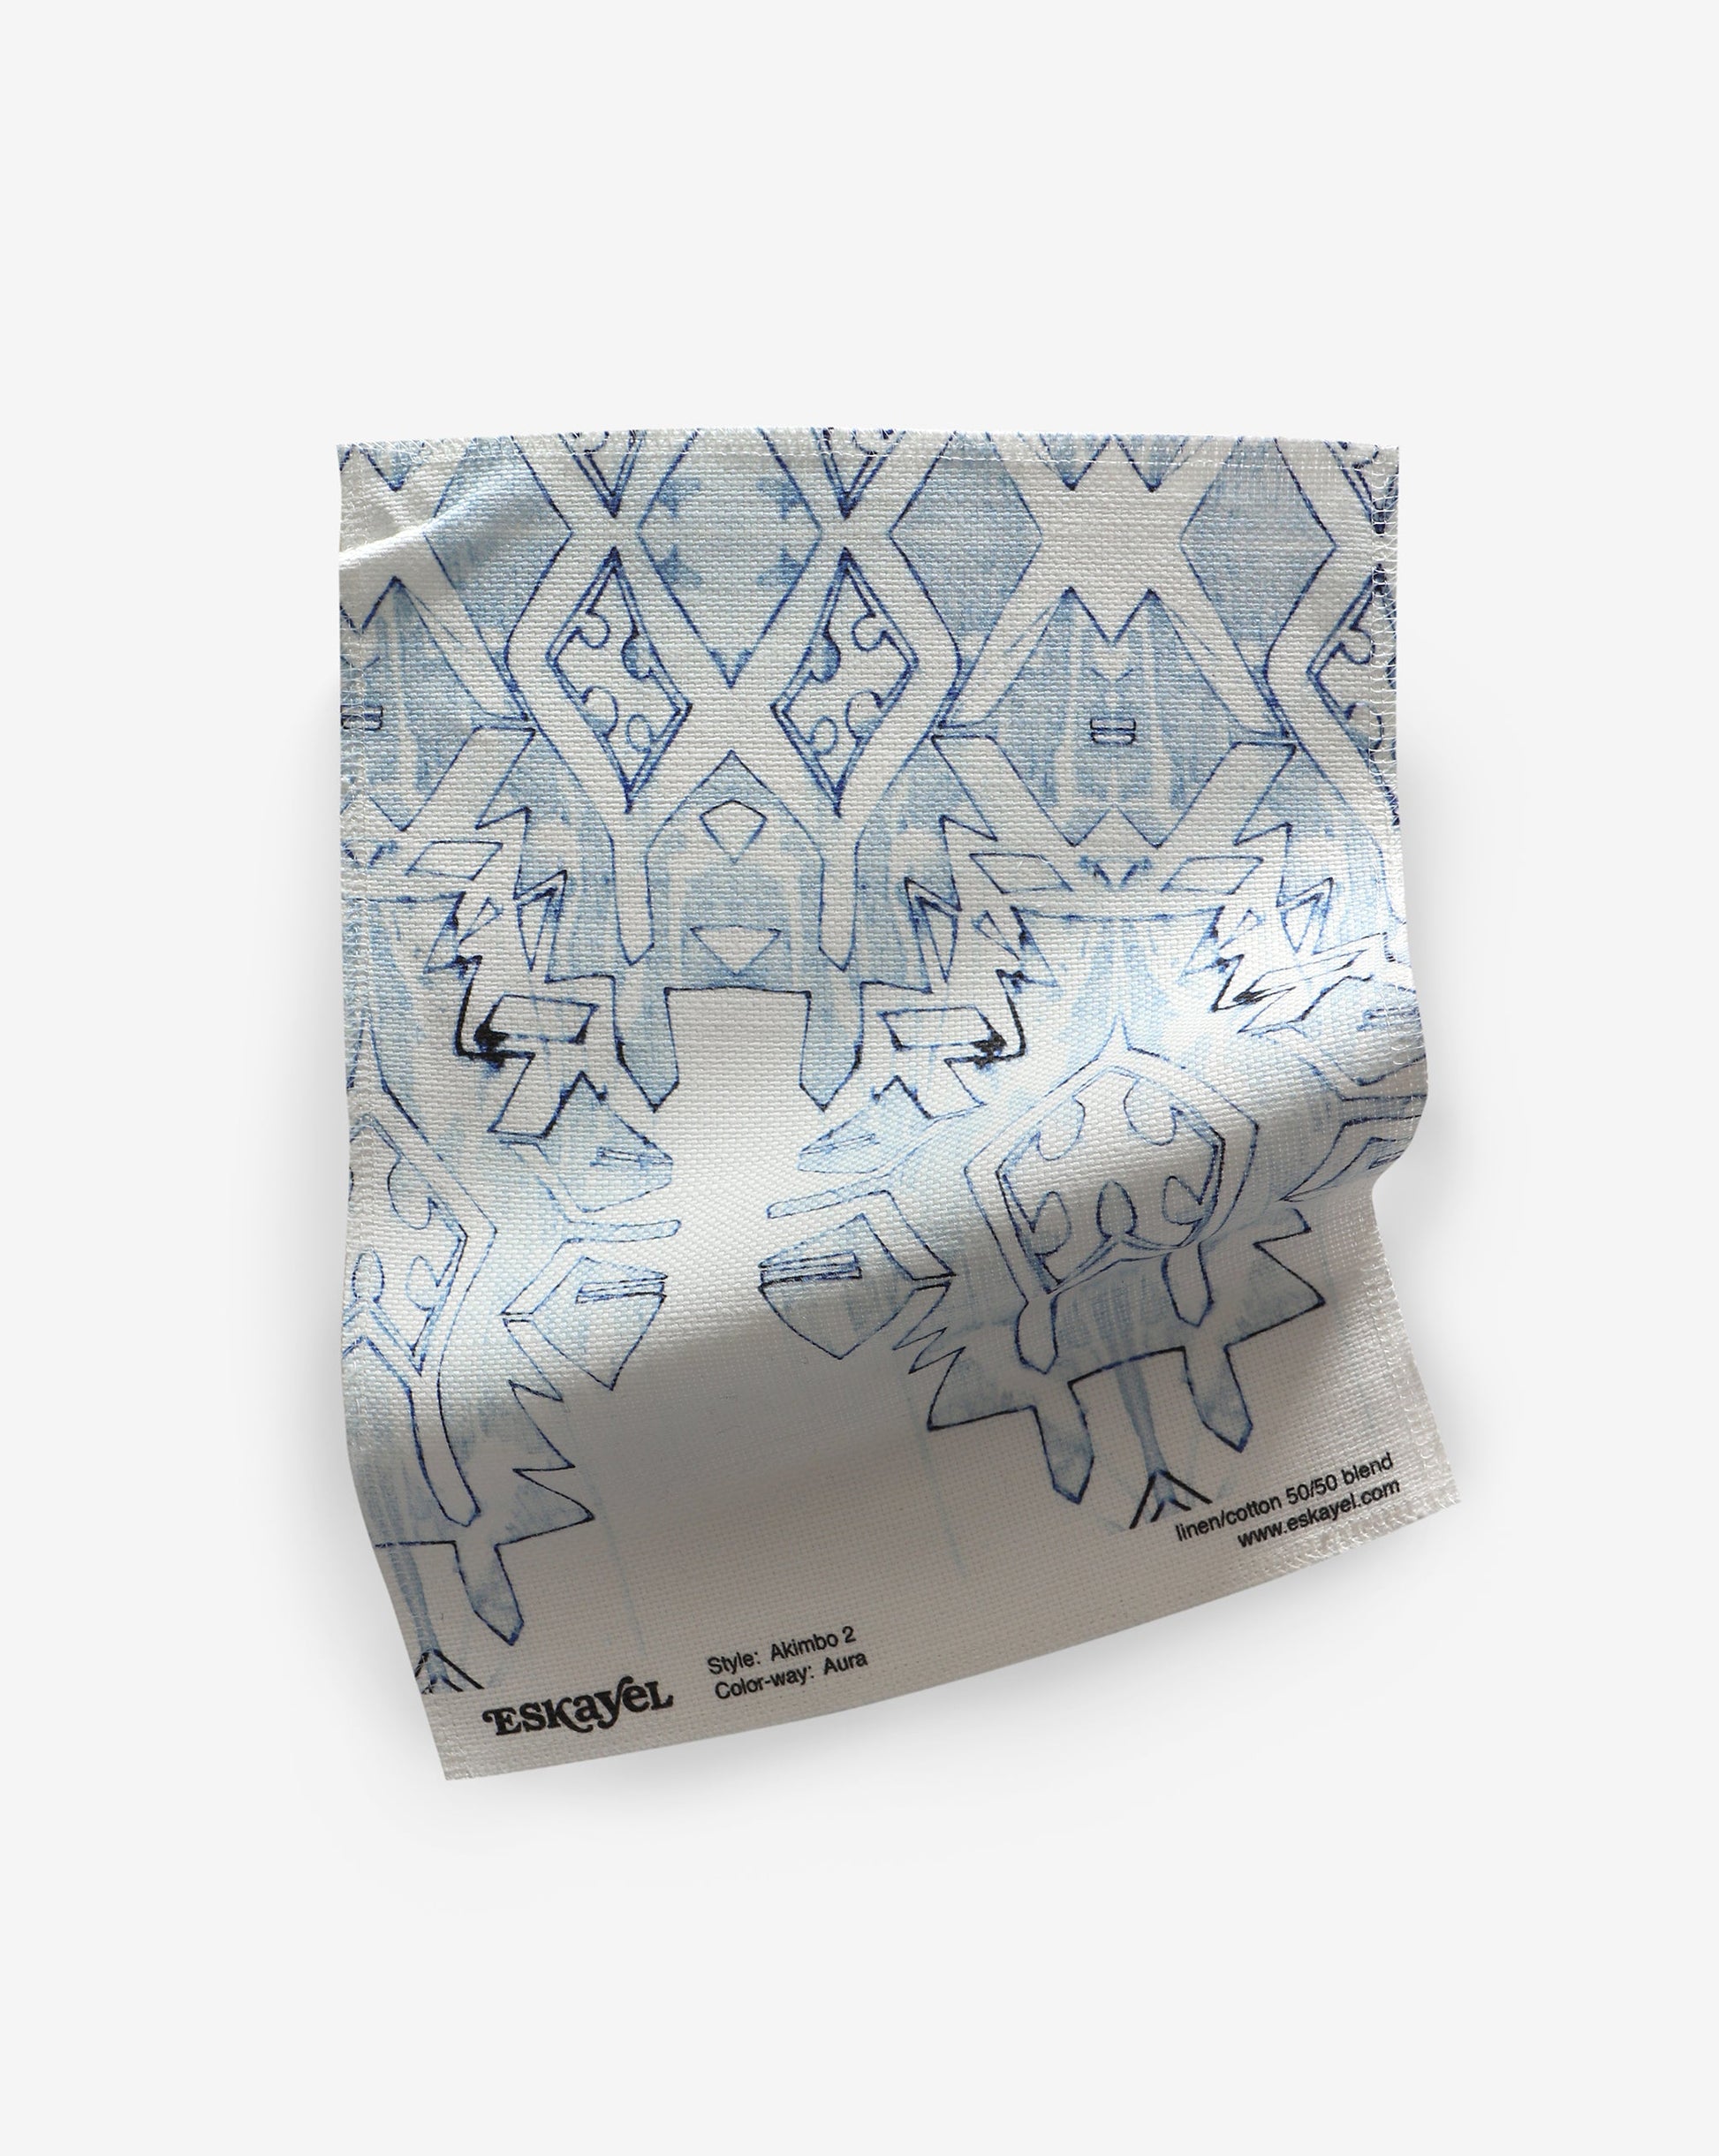 A blue and white Akimbo 2 Fabric with a geometric pattern on it